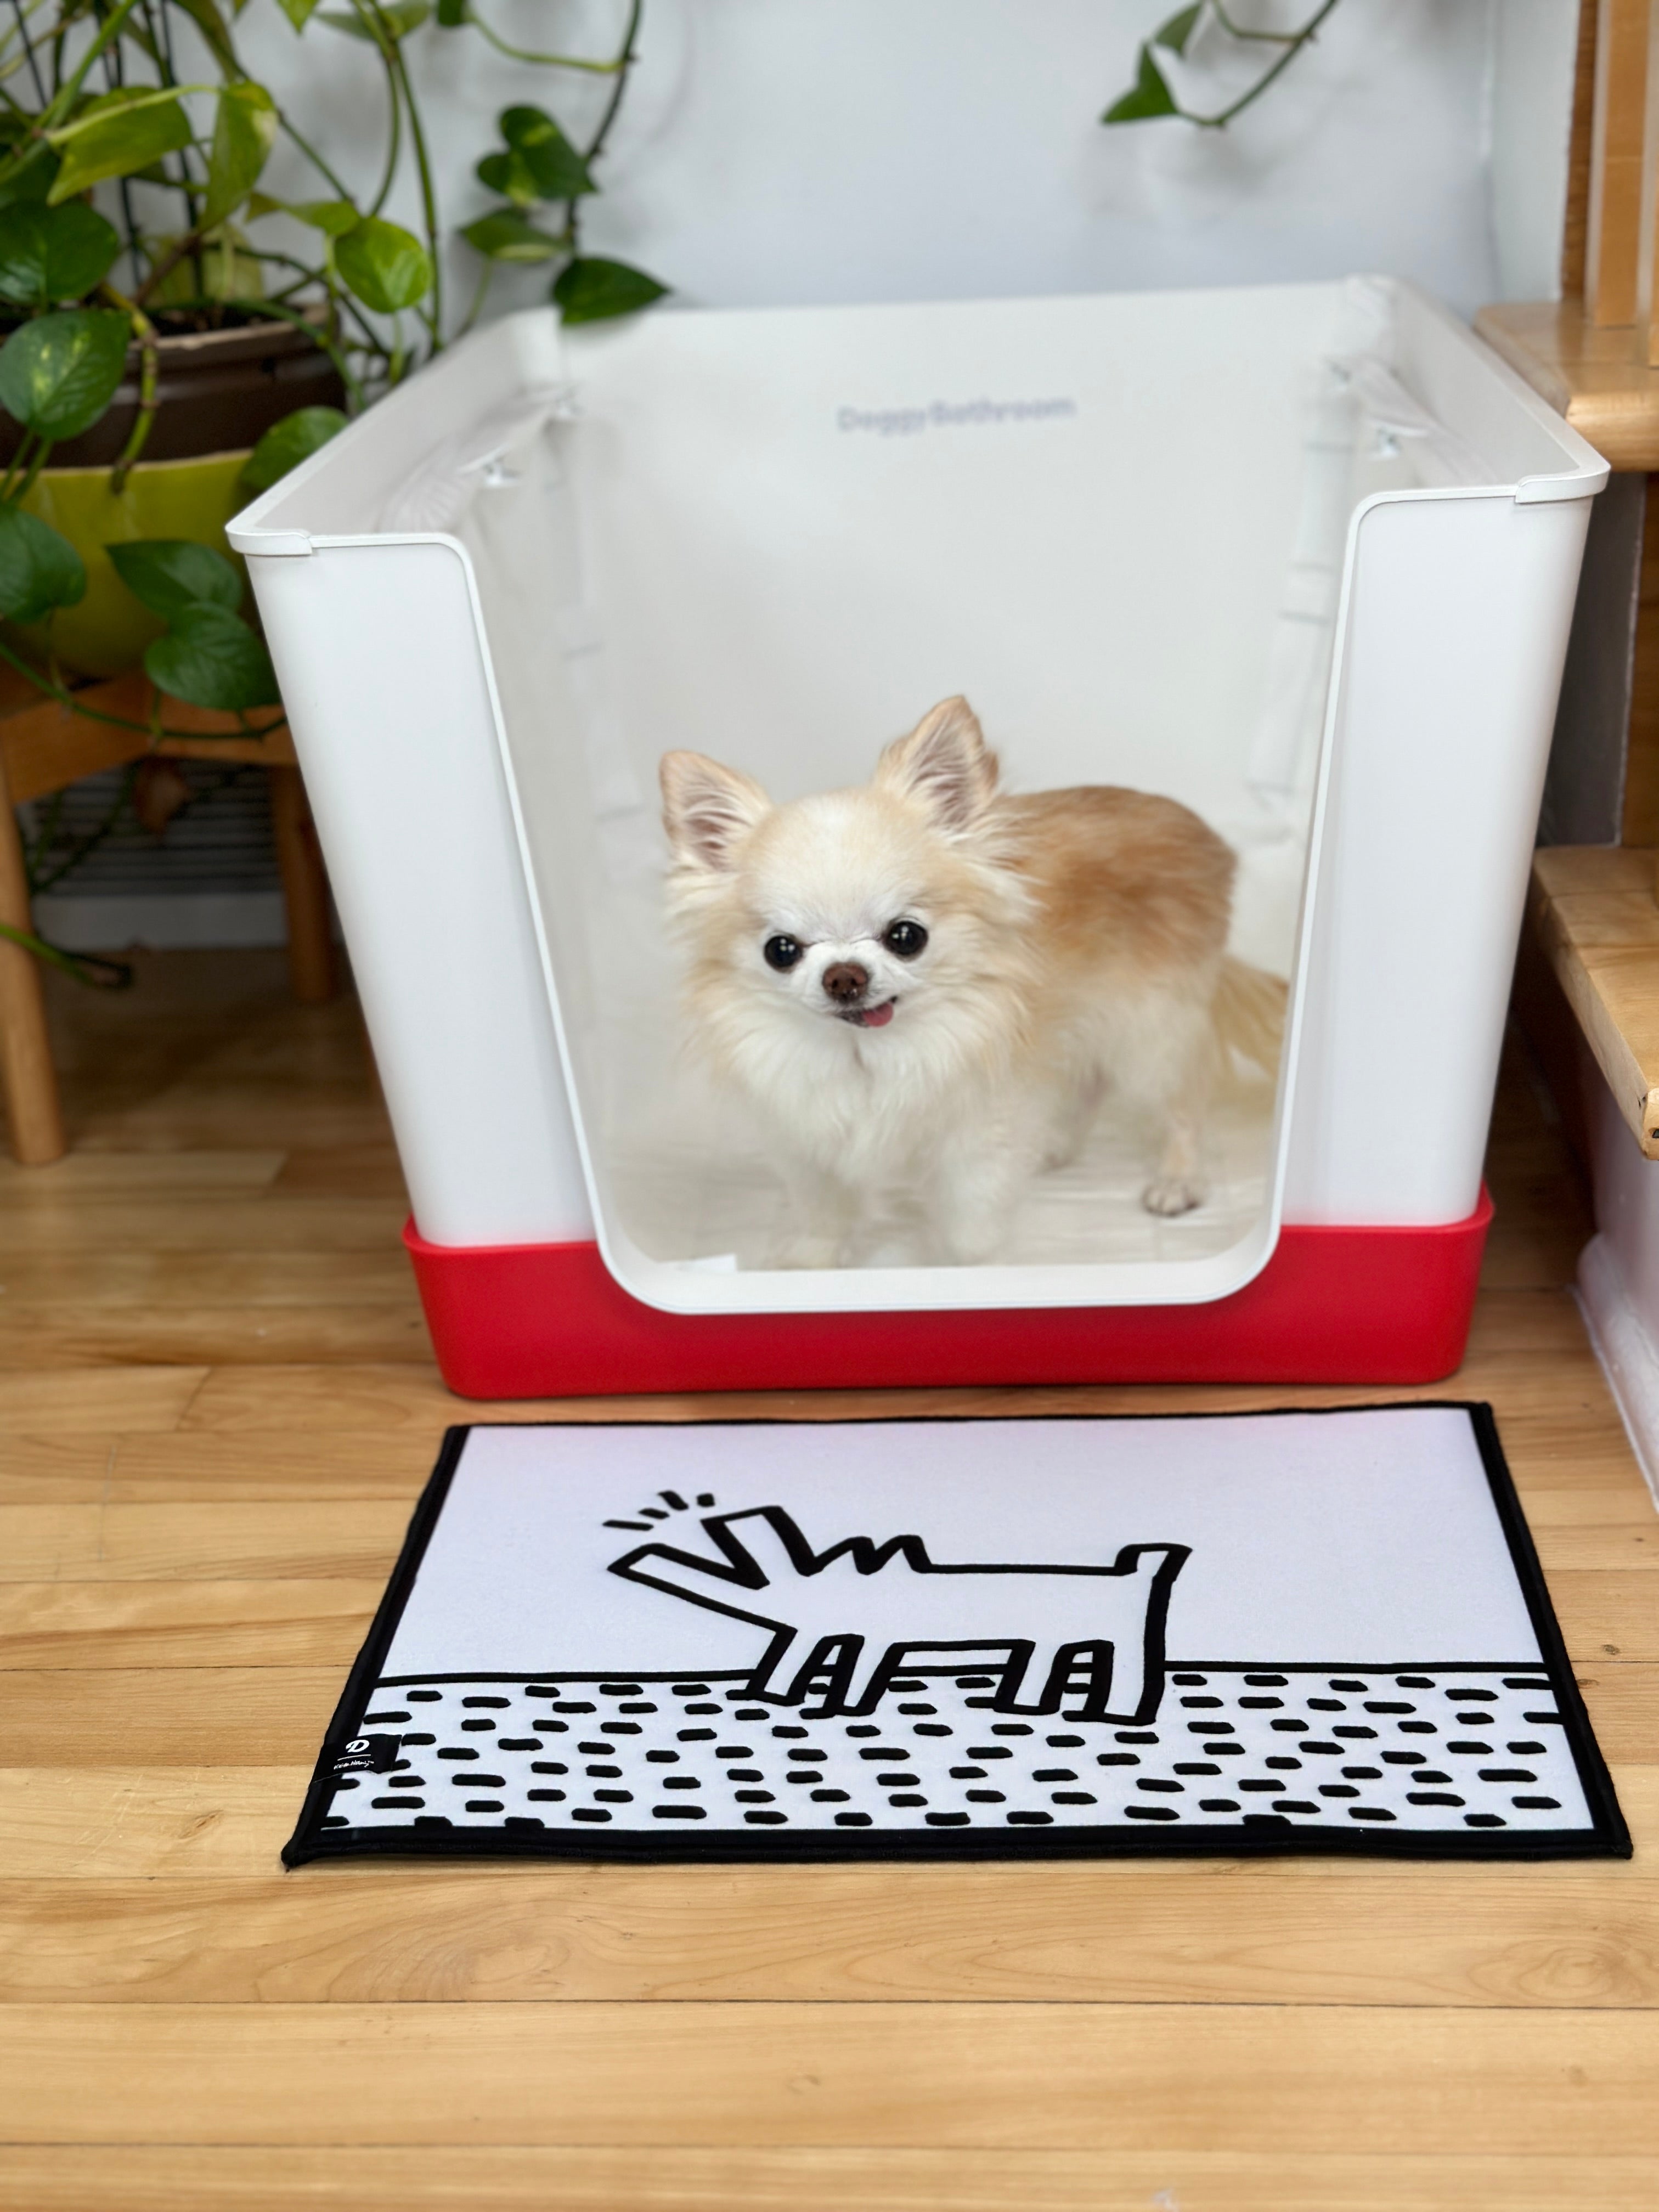 Tiny Chihuahua Shop - Cedric and Maya's Official Merch